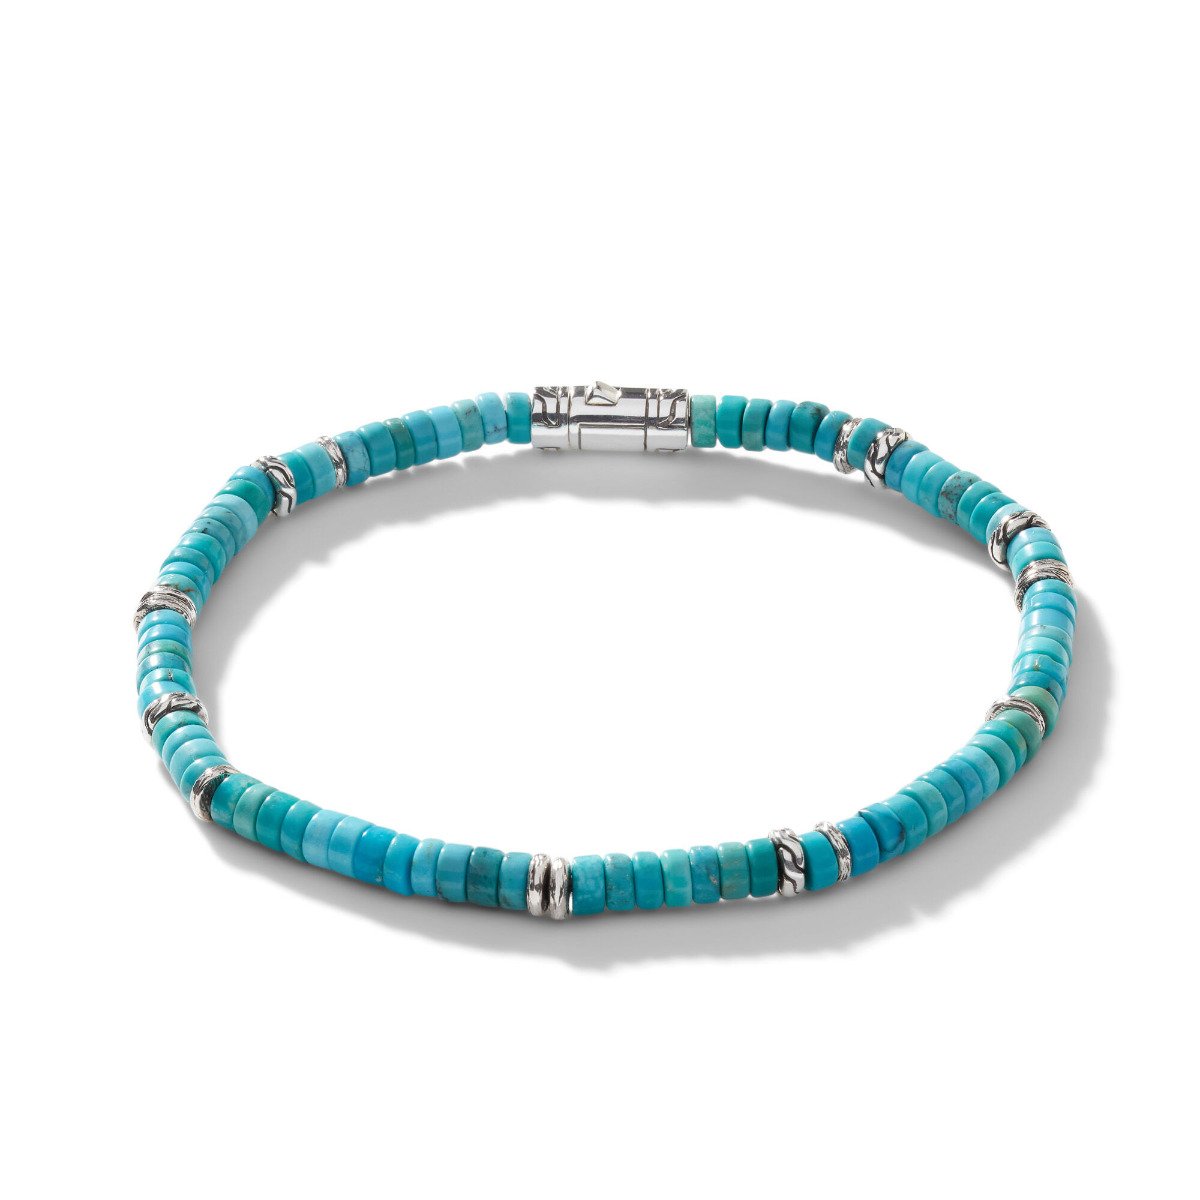 John Hardy "Classic Chain" Heishi Sterling Silver Large Turquoise Beaded Bracelet